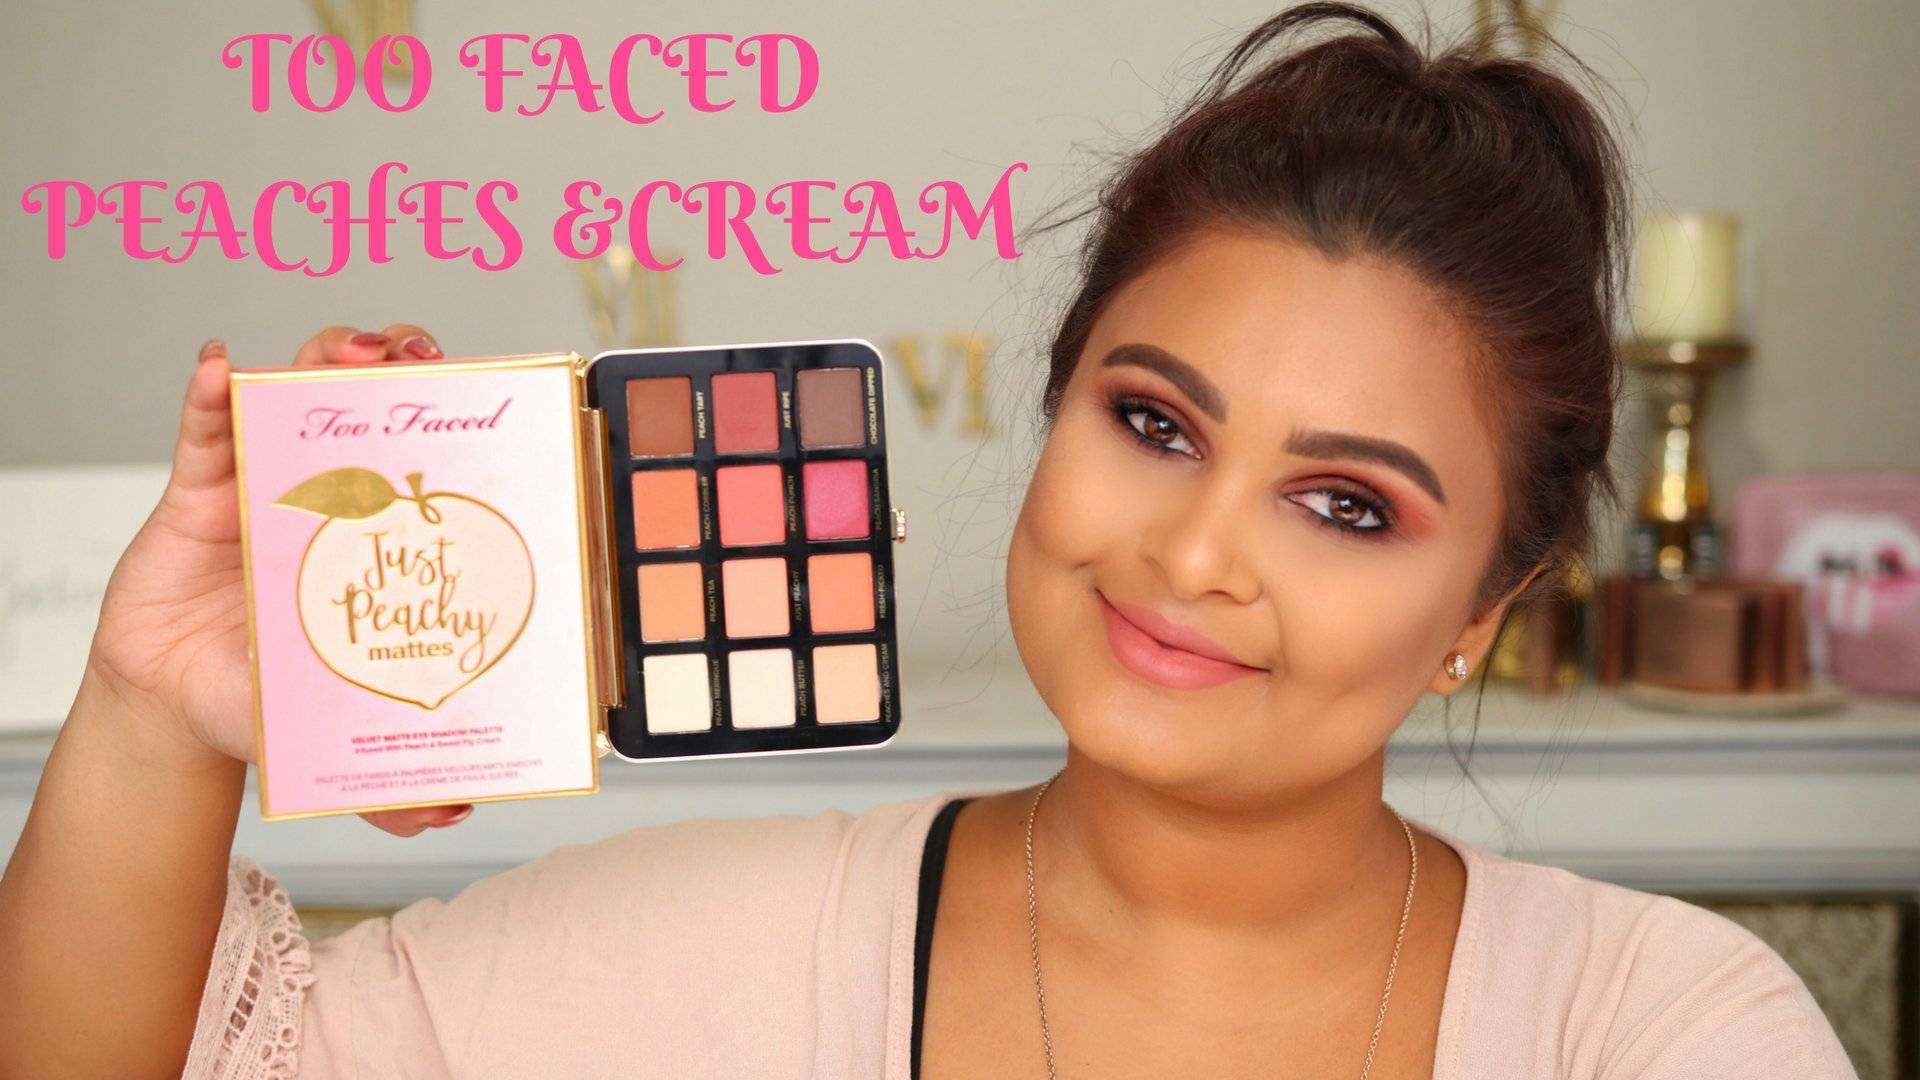 Too faced just peachy mattes eyeshadow palette review + 3 looks - always, cleia